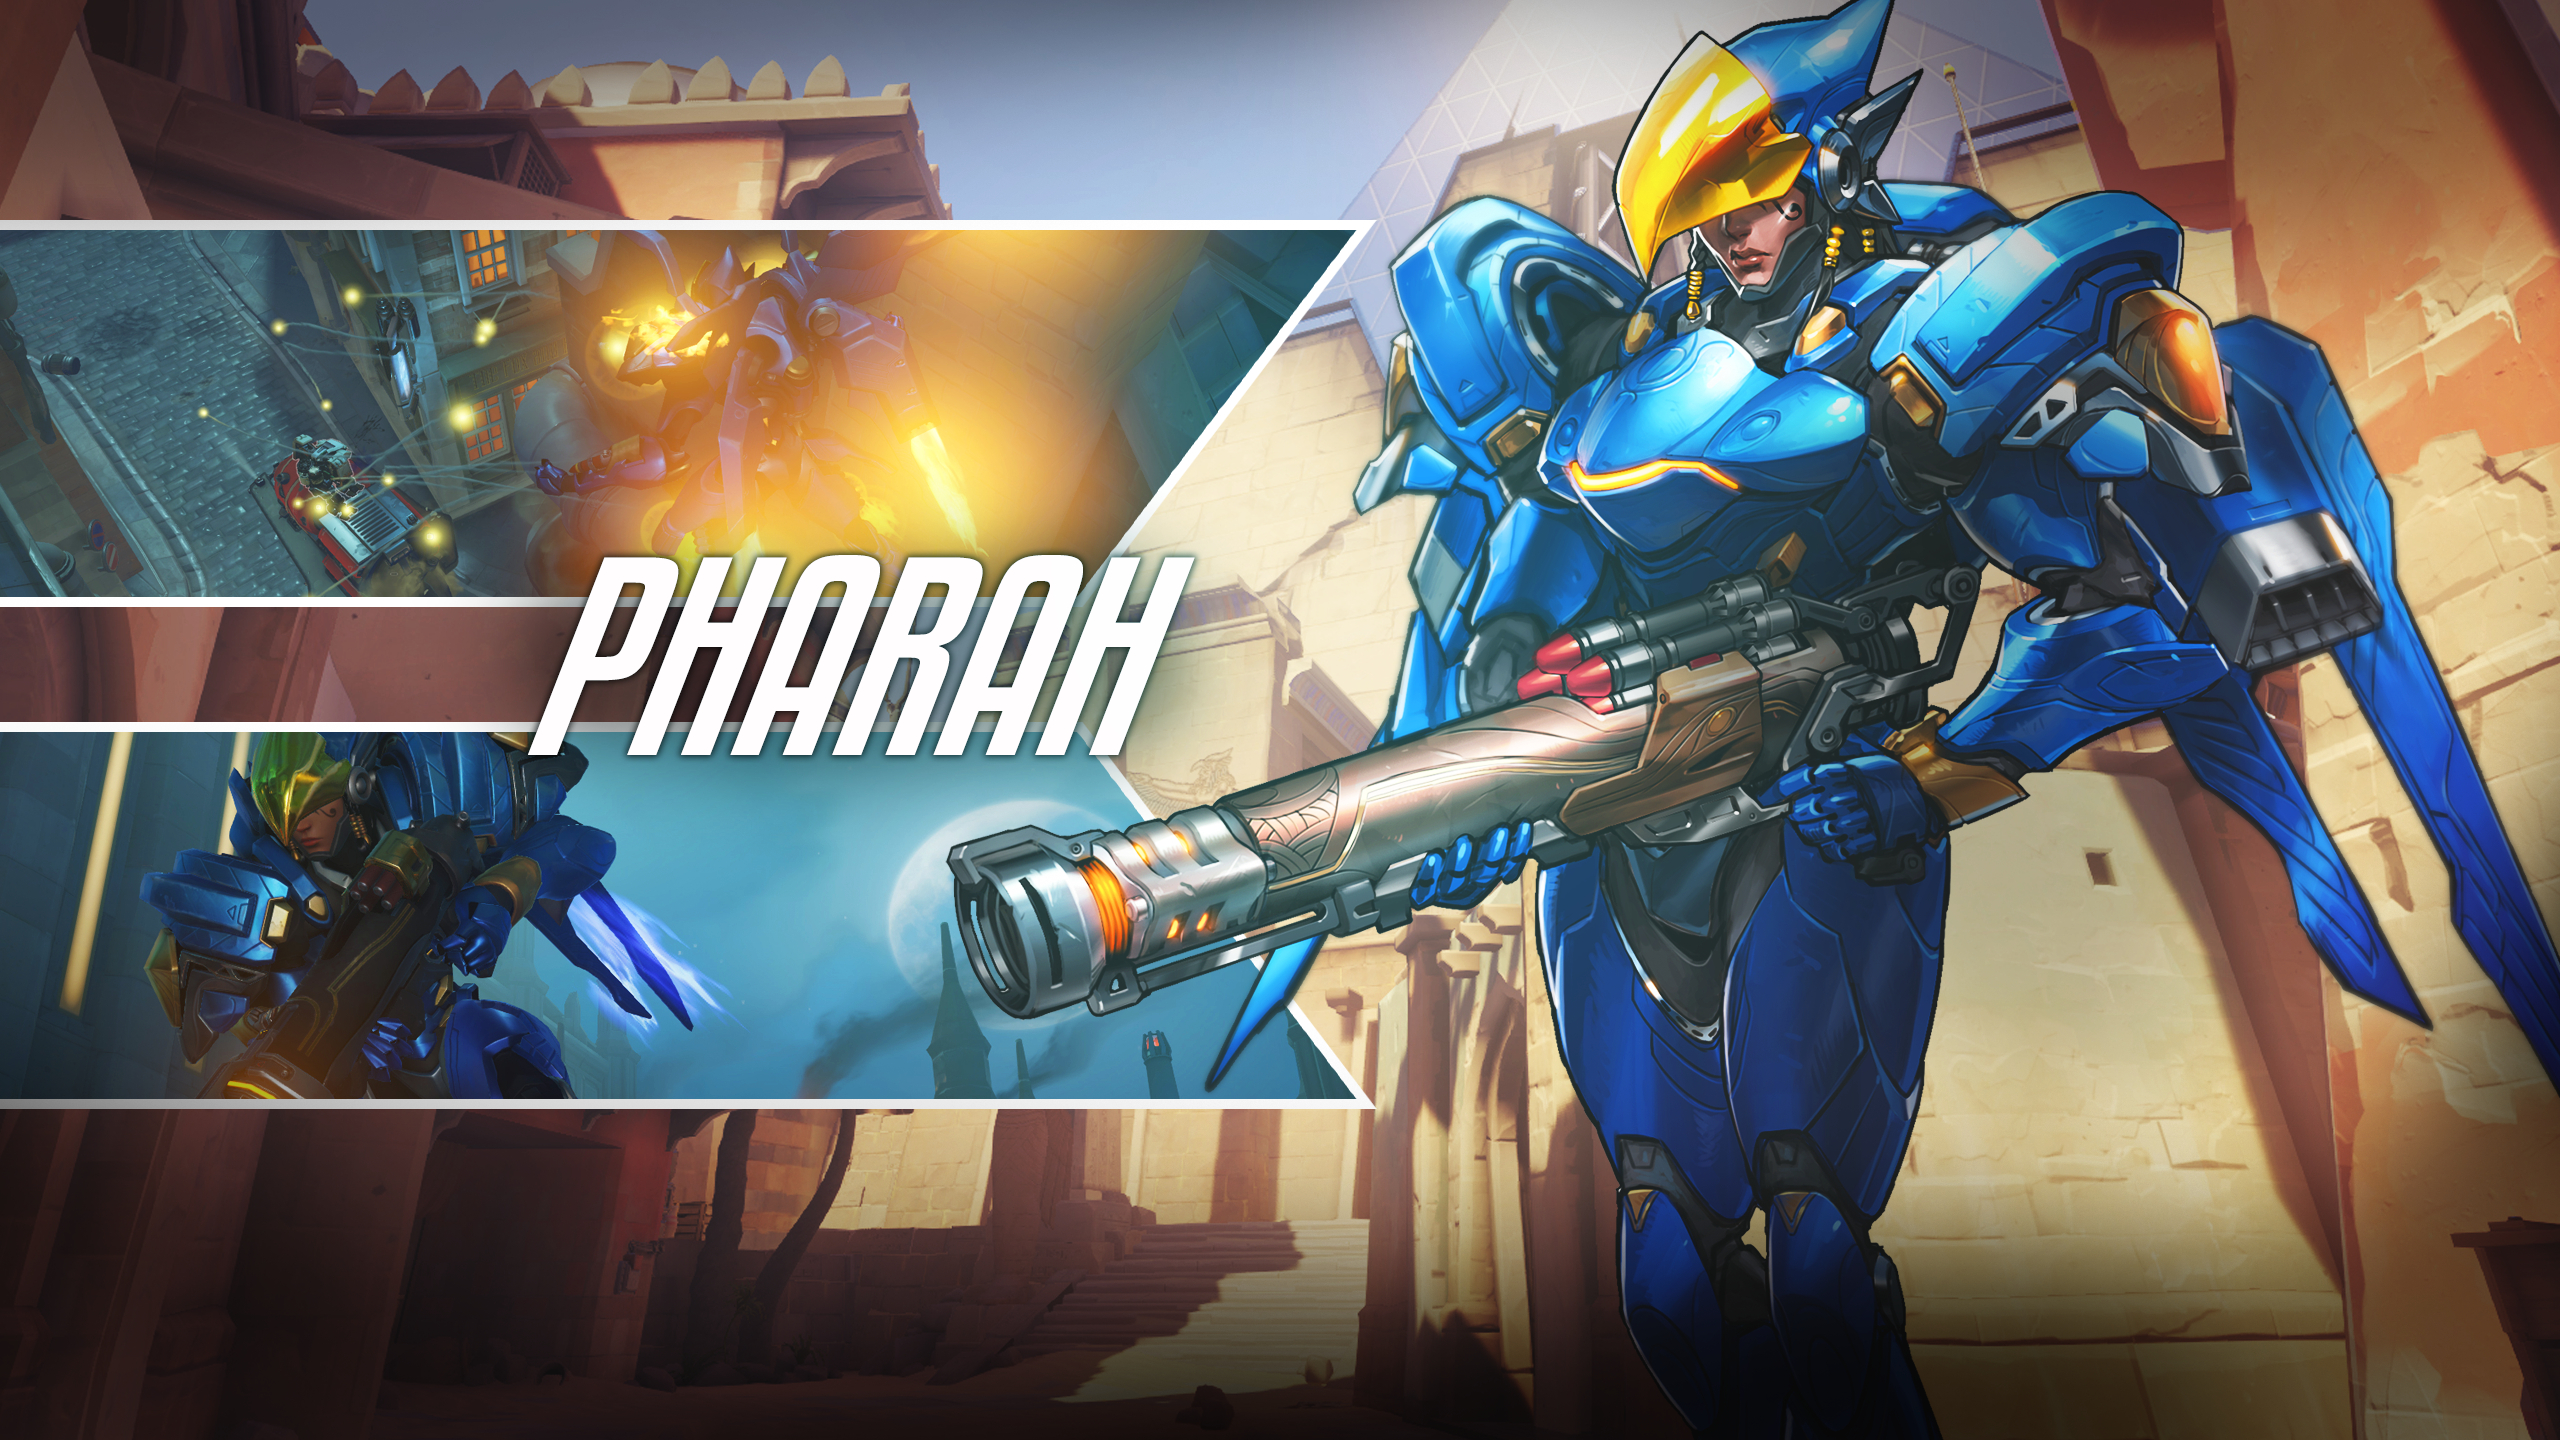 2560x1440 100+ Pharah (Overwatch) HD Wallpapers and Backgrounds